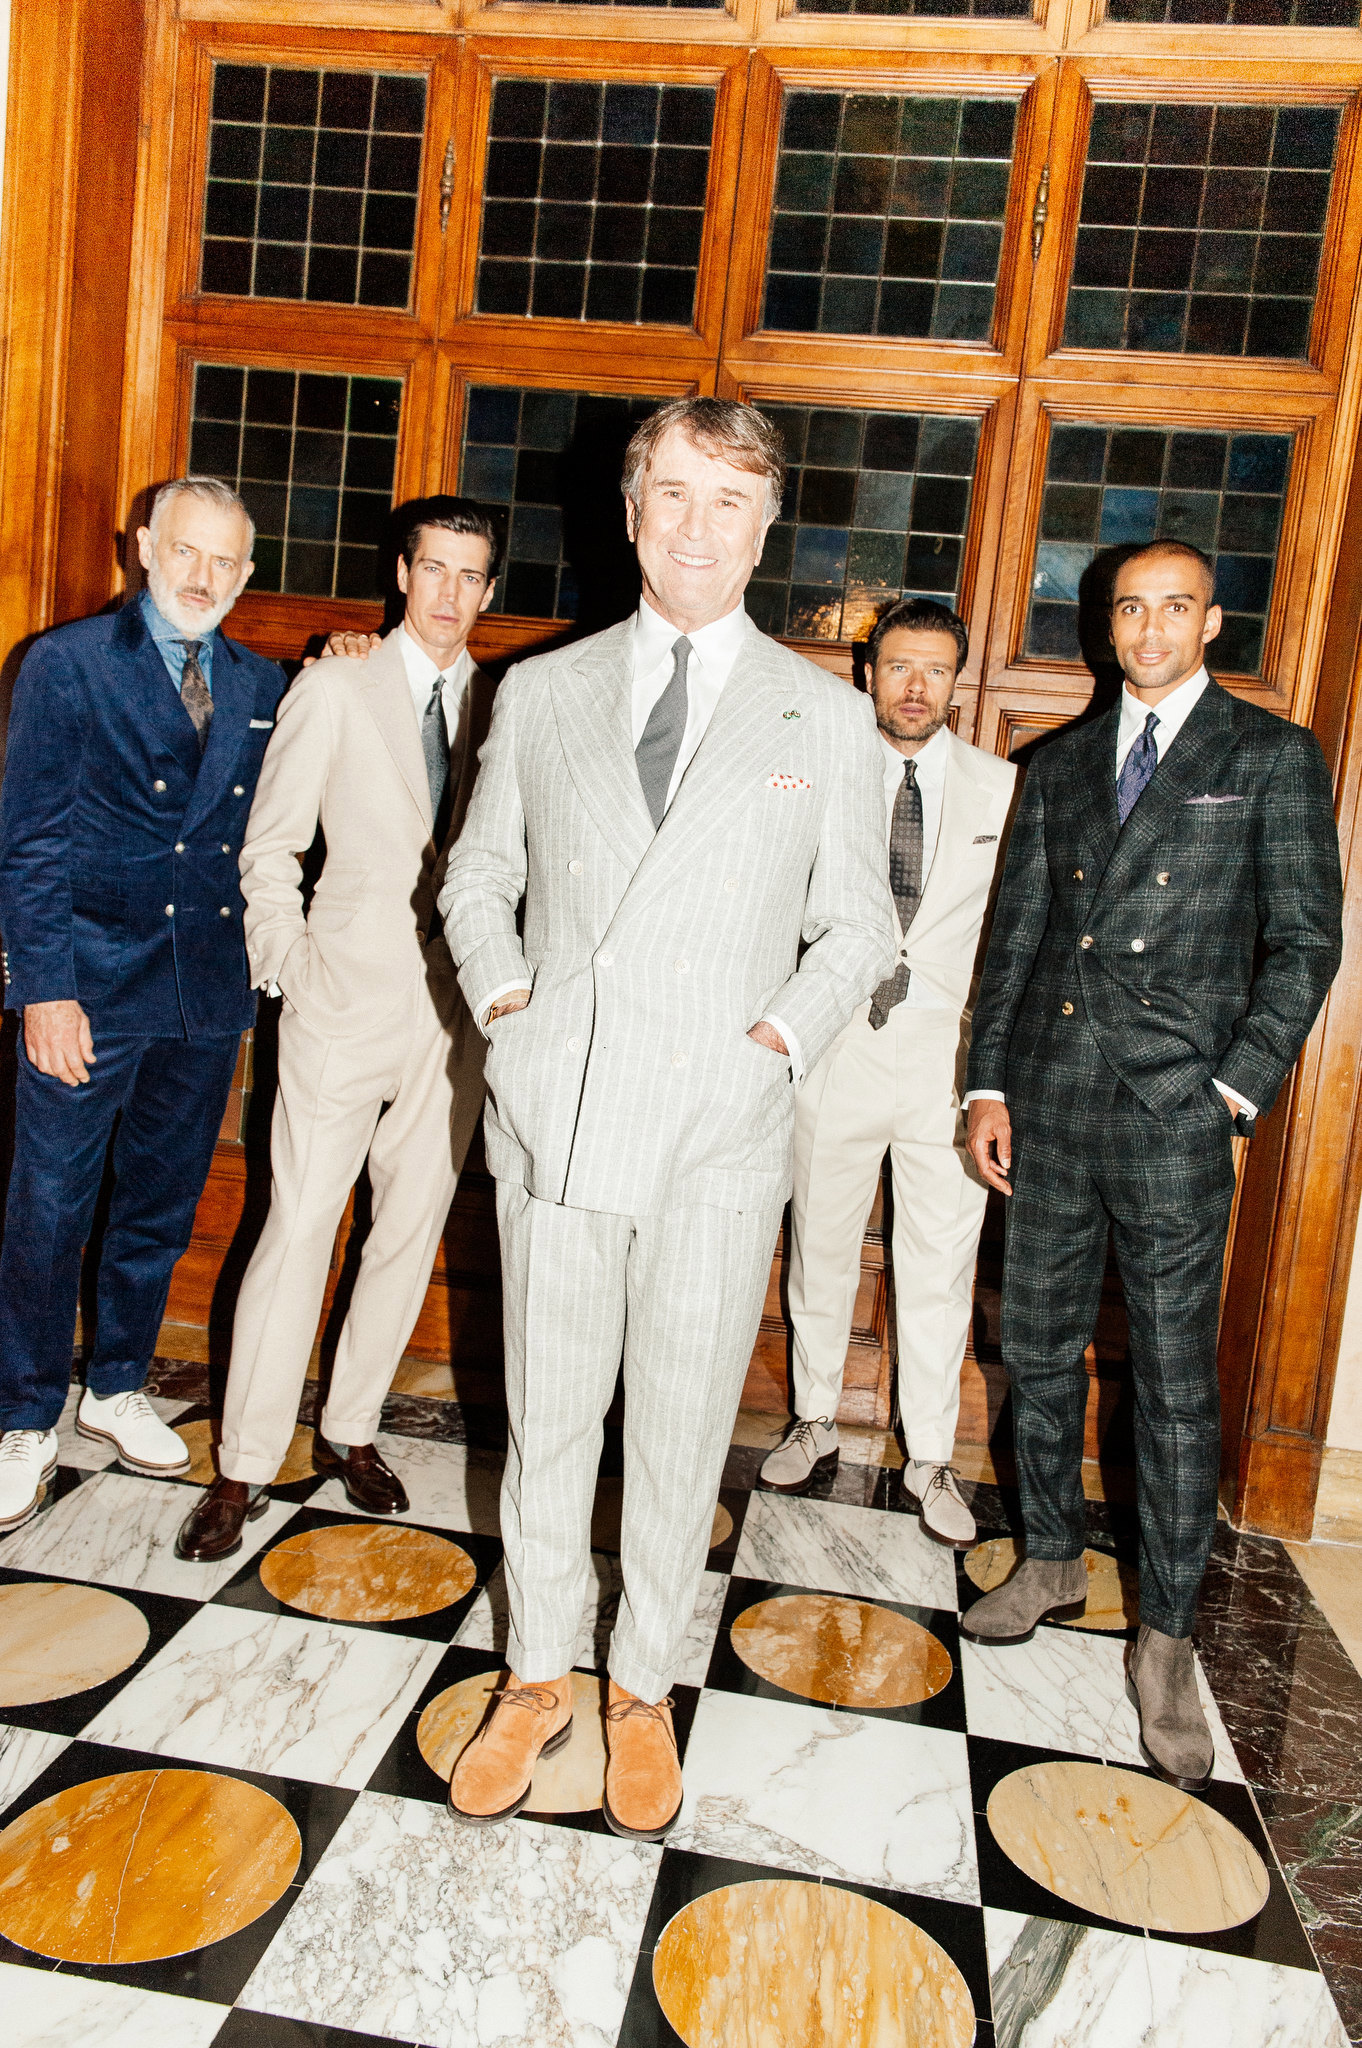 Men's Tailoring: More Than a Fashion Trend for Italian Brands